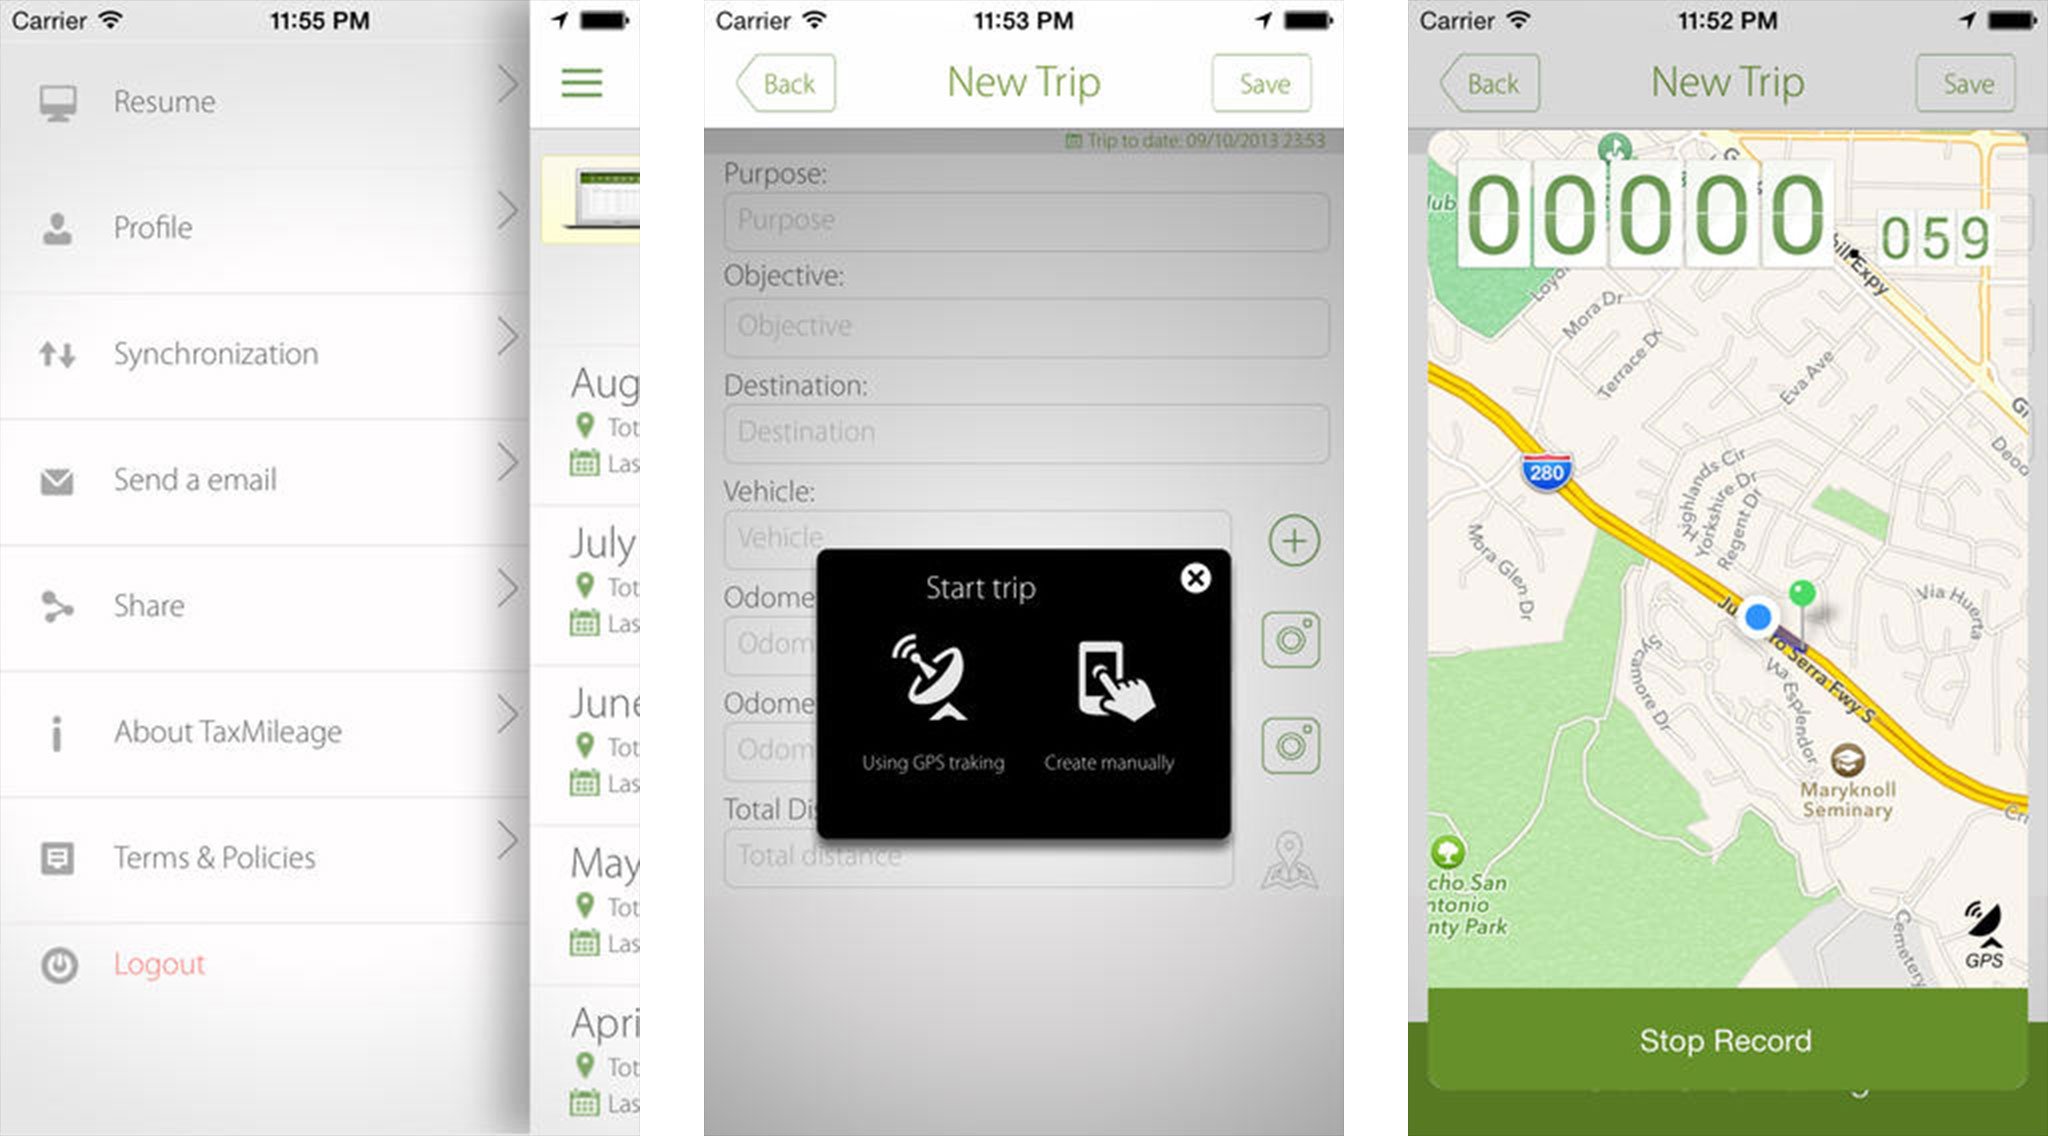 Best mileage tracking apps for iPhone: TaxMileage